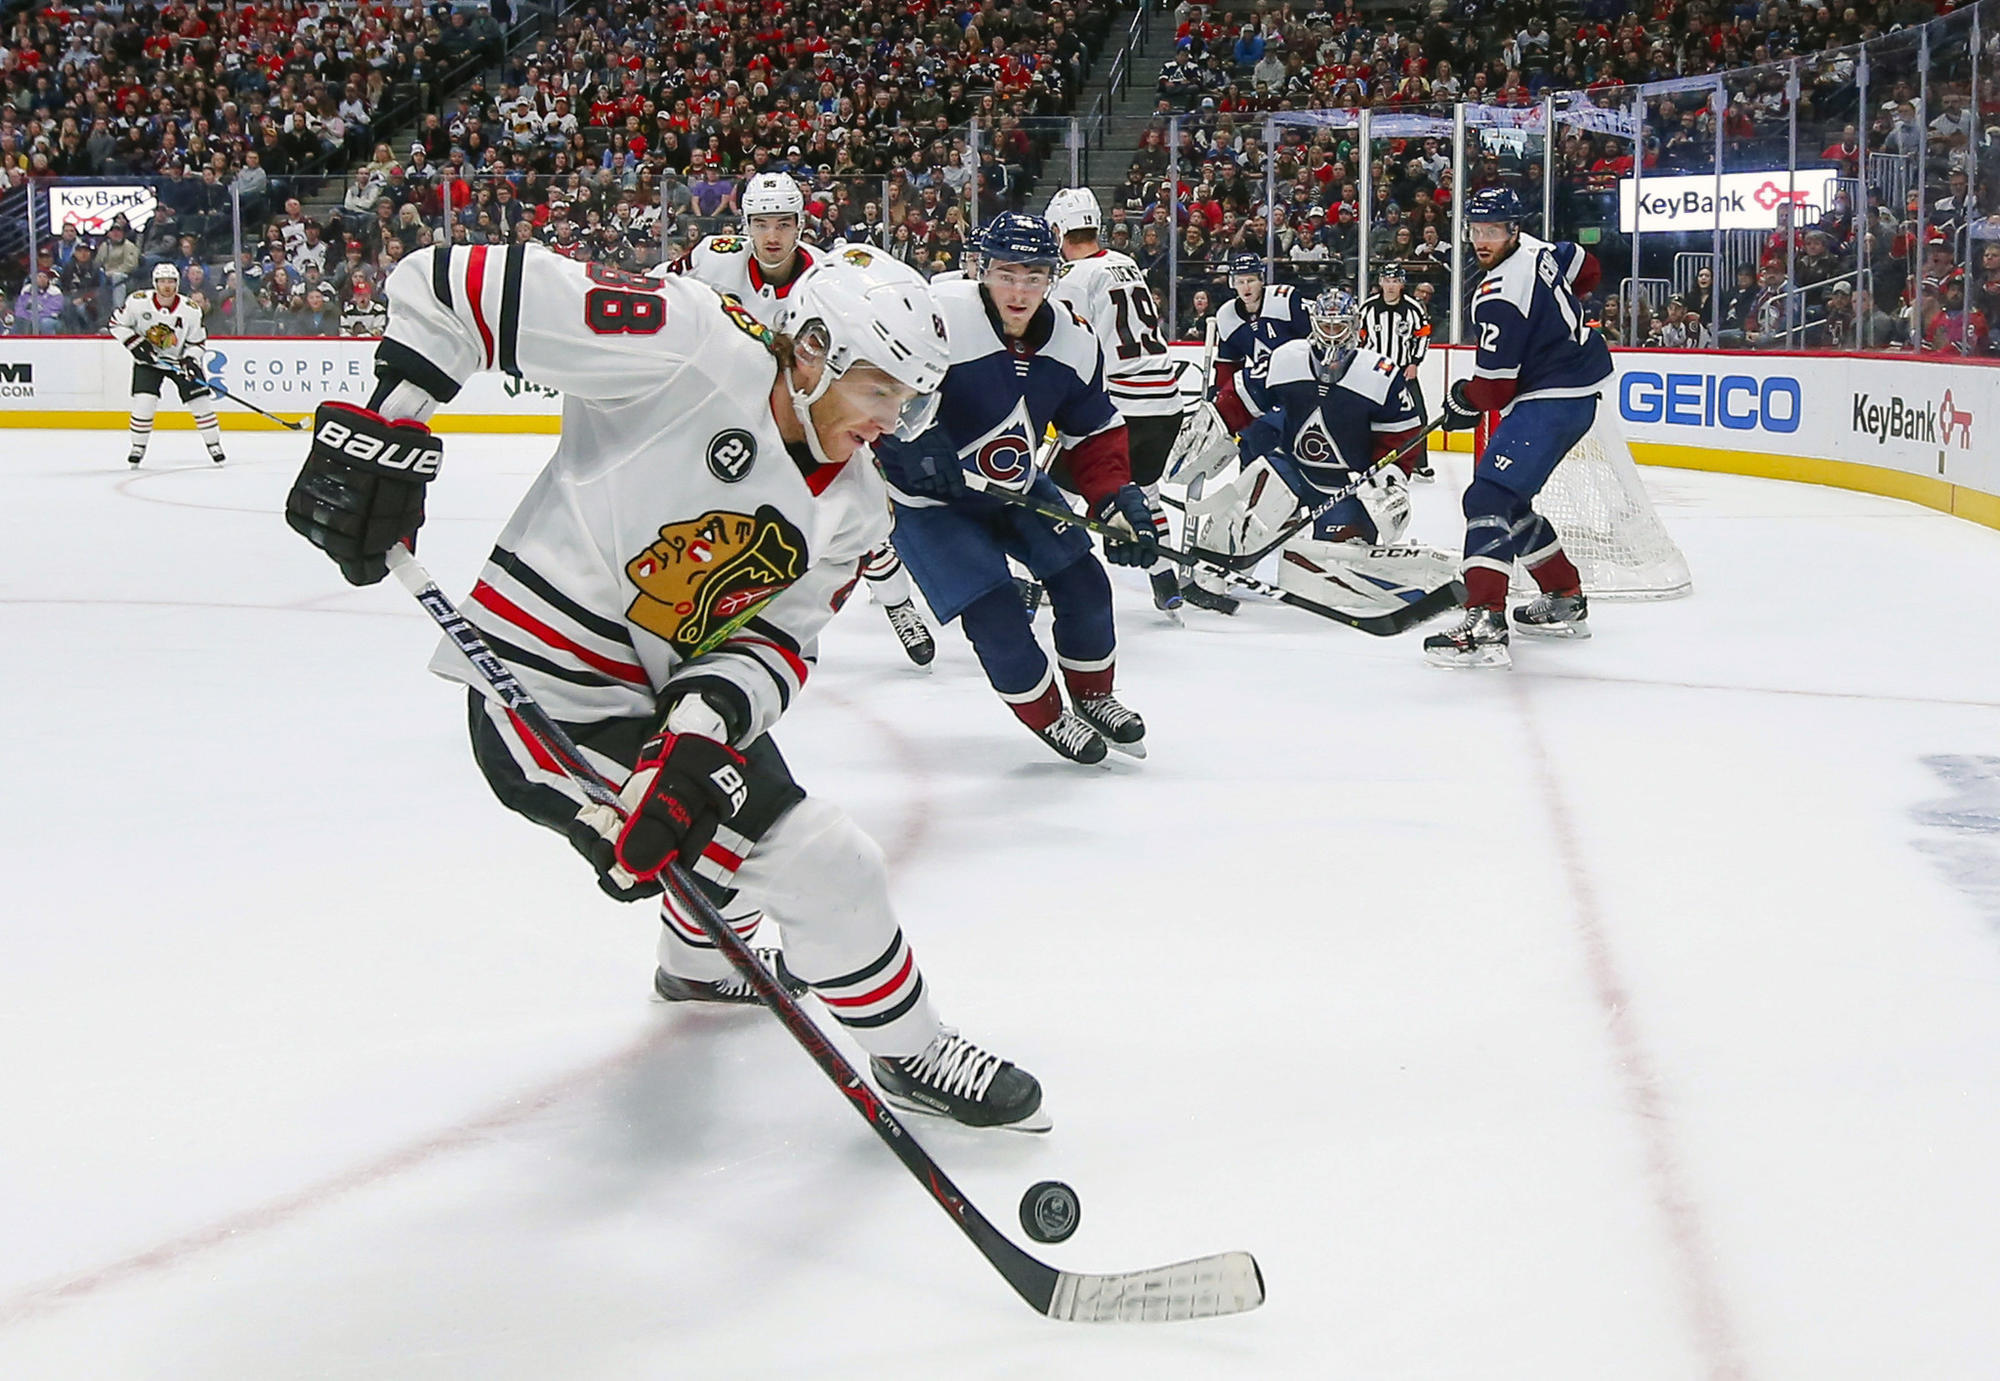 Instead of standing tall in their biggest game of the season, the Blackhawks fall short in a 4-2 loss to the Avs